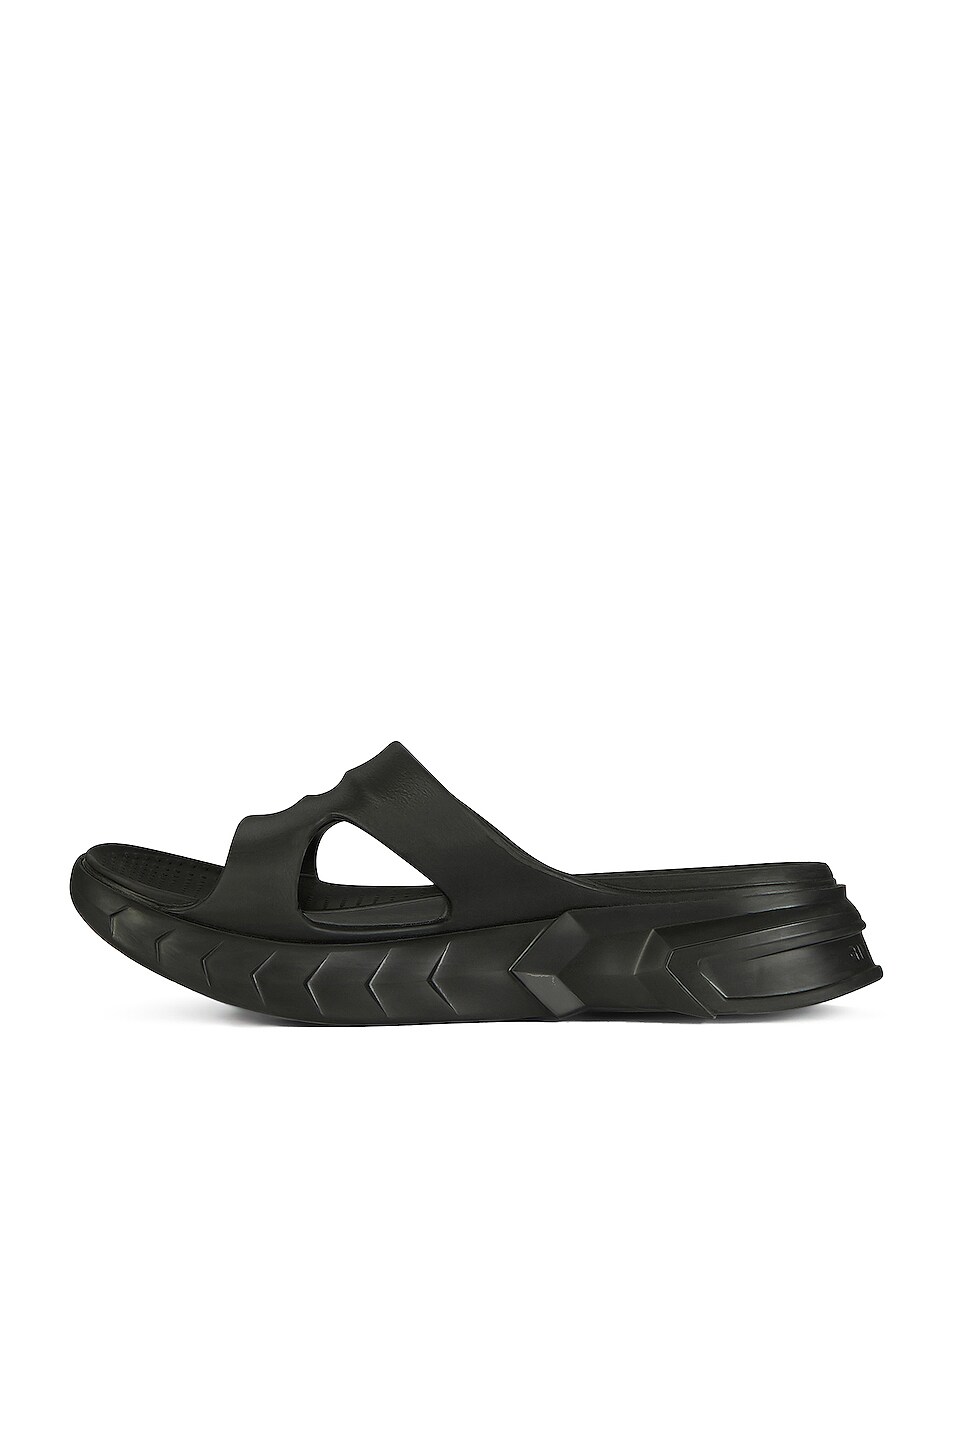 Givenchy Marshmallow Slider Sandals in Black | FWRD